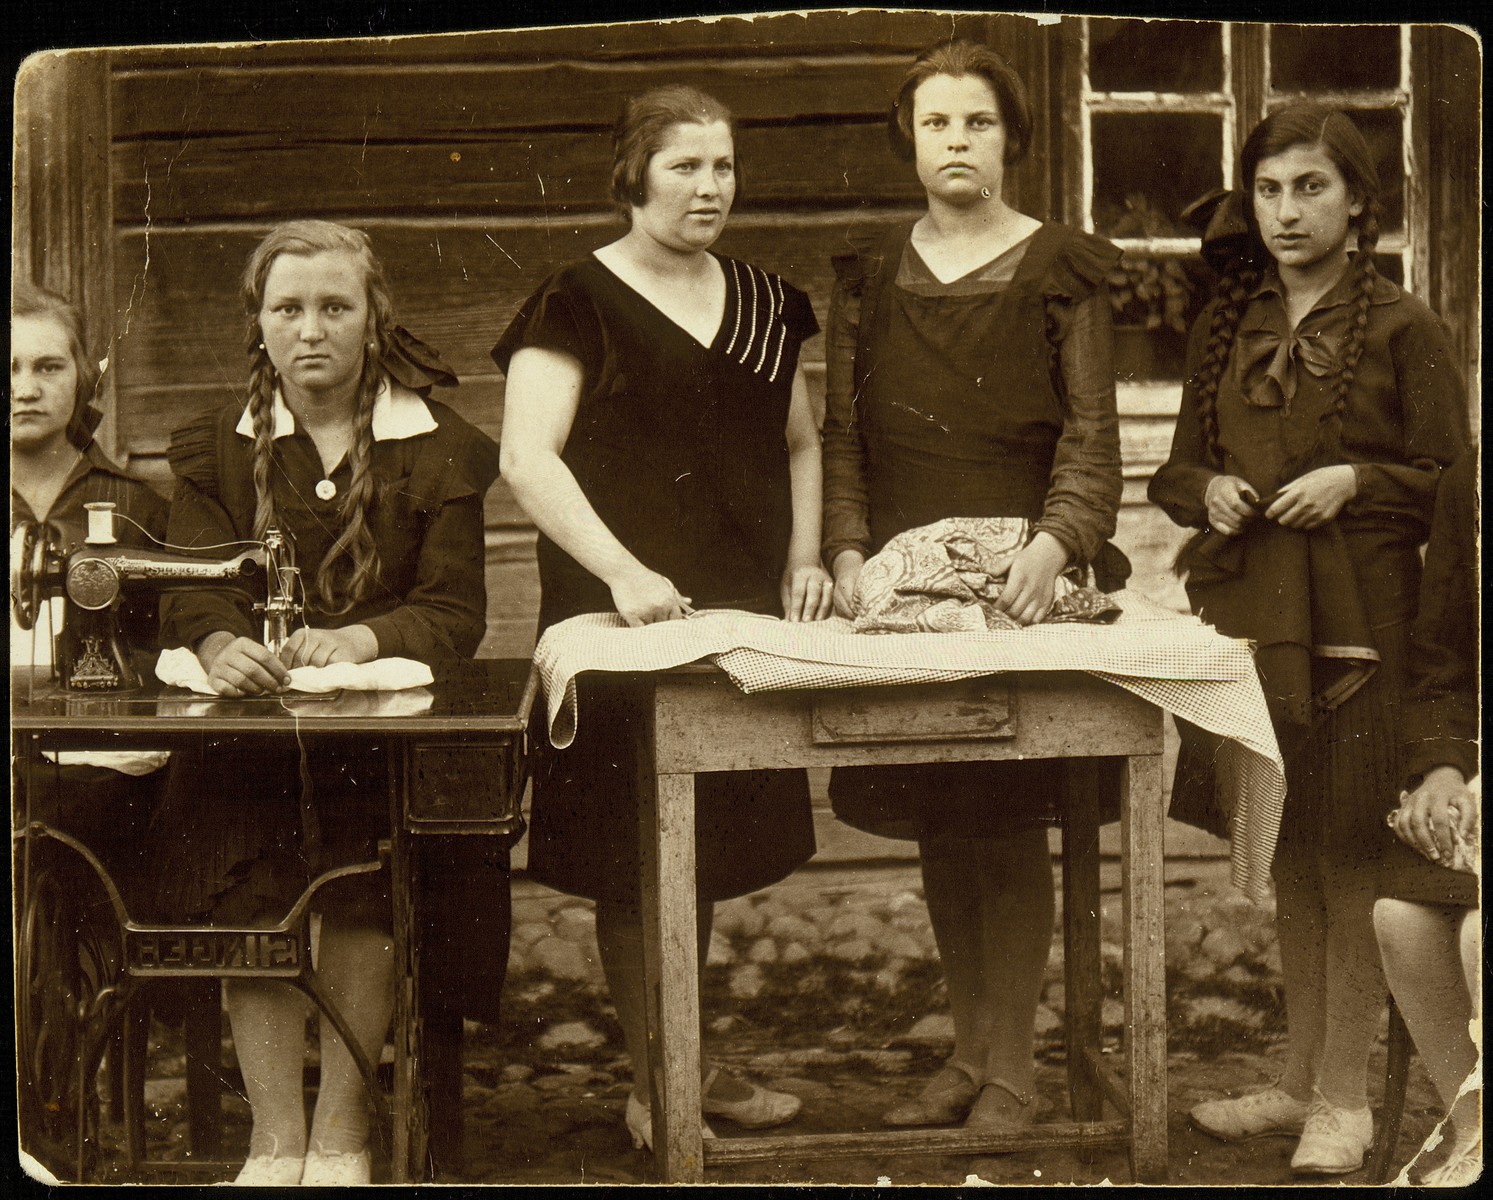 Young women attend a sewing class taught by a master seamstress from Vasilishok.

Sitting from right to left: Rozka Chesler from Vasilishok, first name unknown Pochter, Rivka, the seamstress, Dora Zlotnik, unknown.  Dora immigrated to Palestine.  All the other women were murdered during the Holocaust.